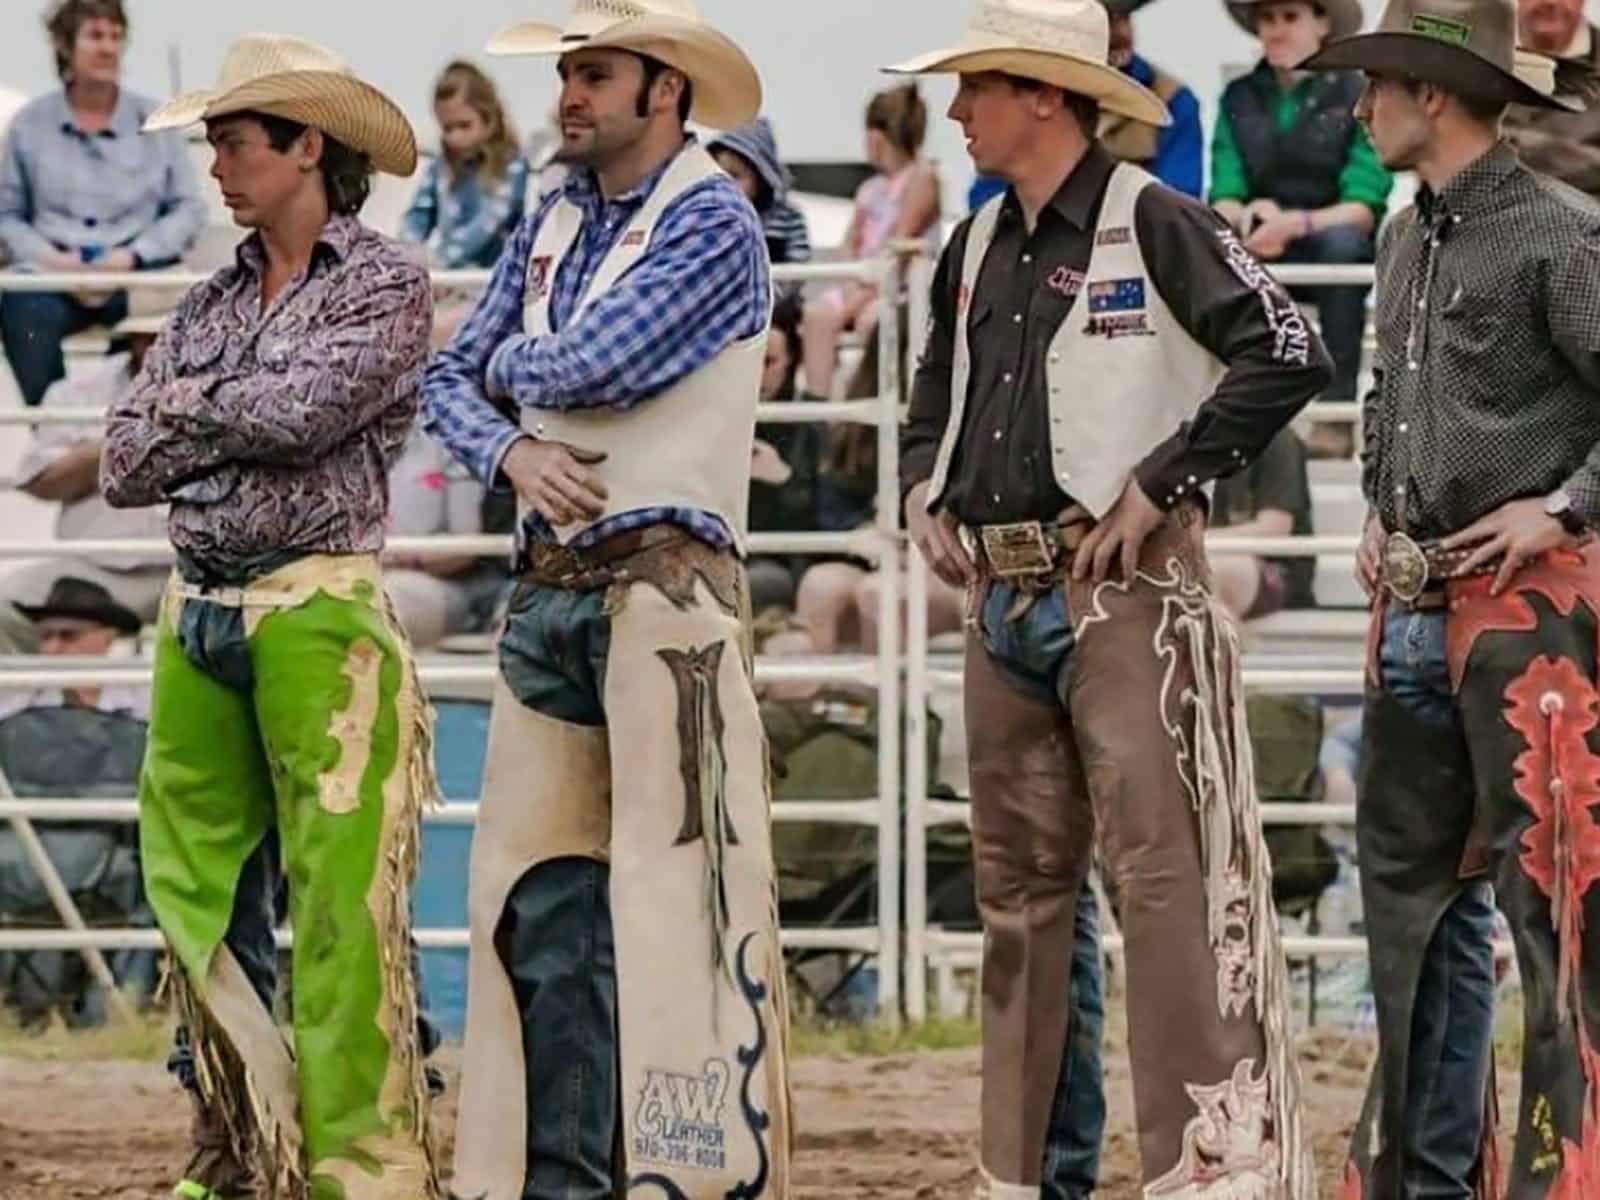 4 cowboys in stockyard watching a rodeo